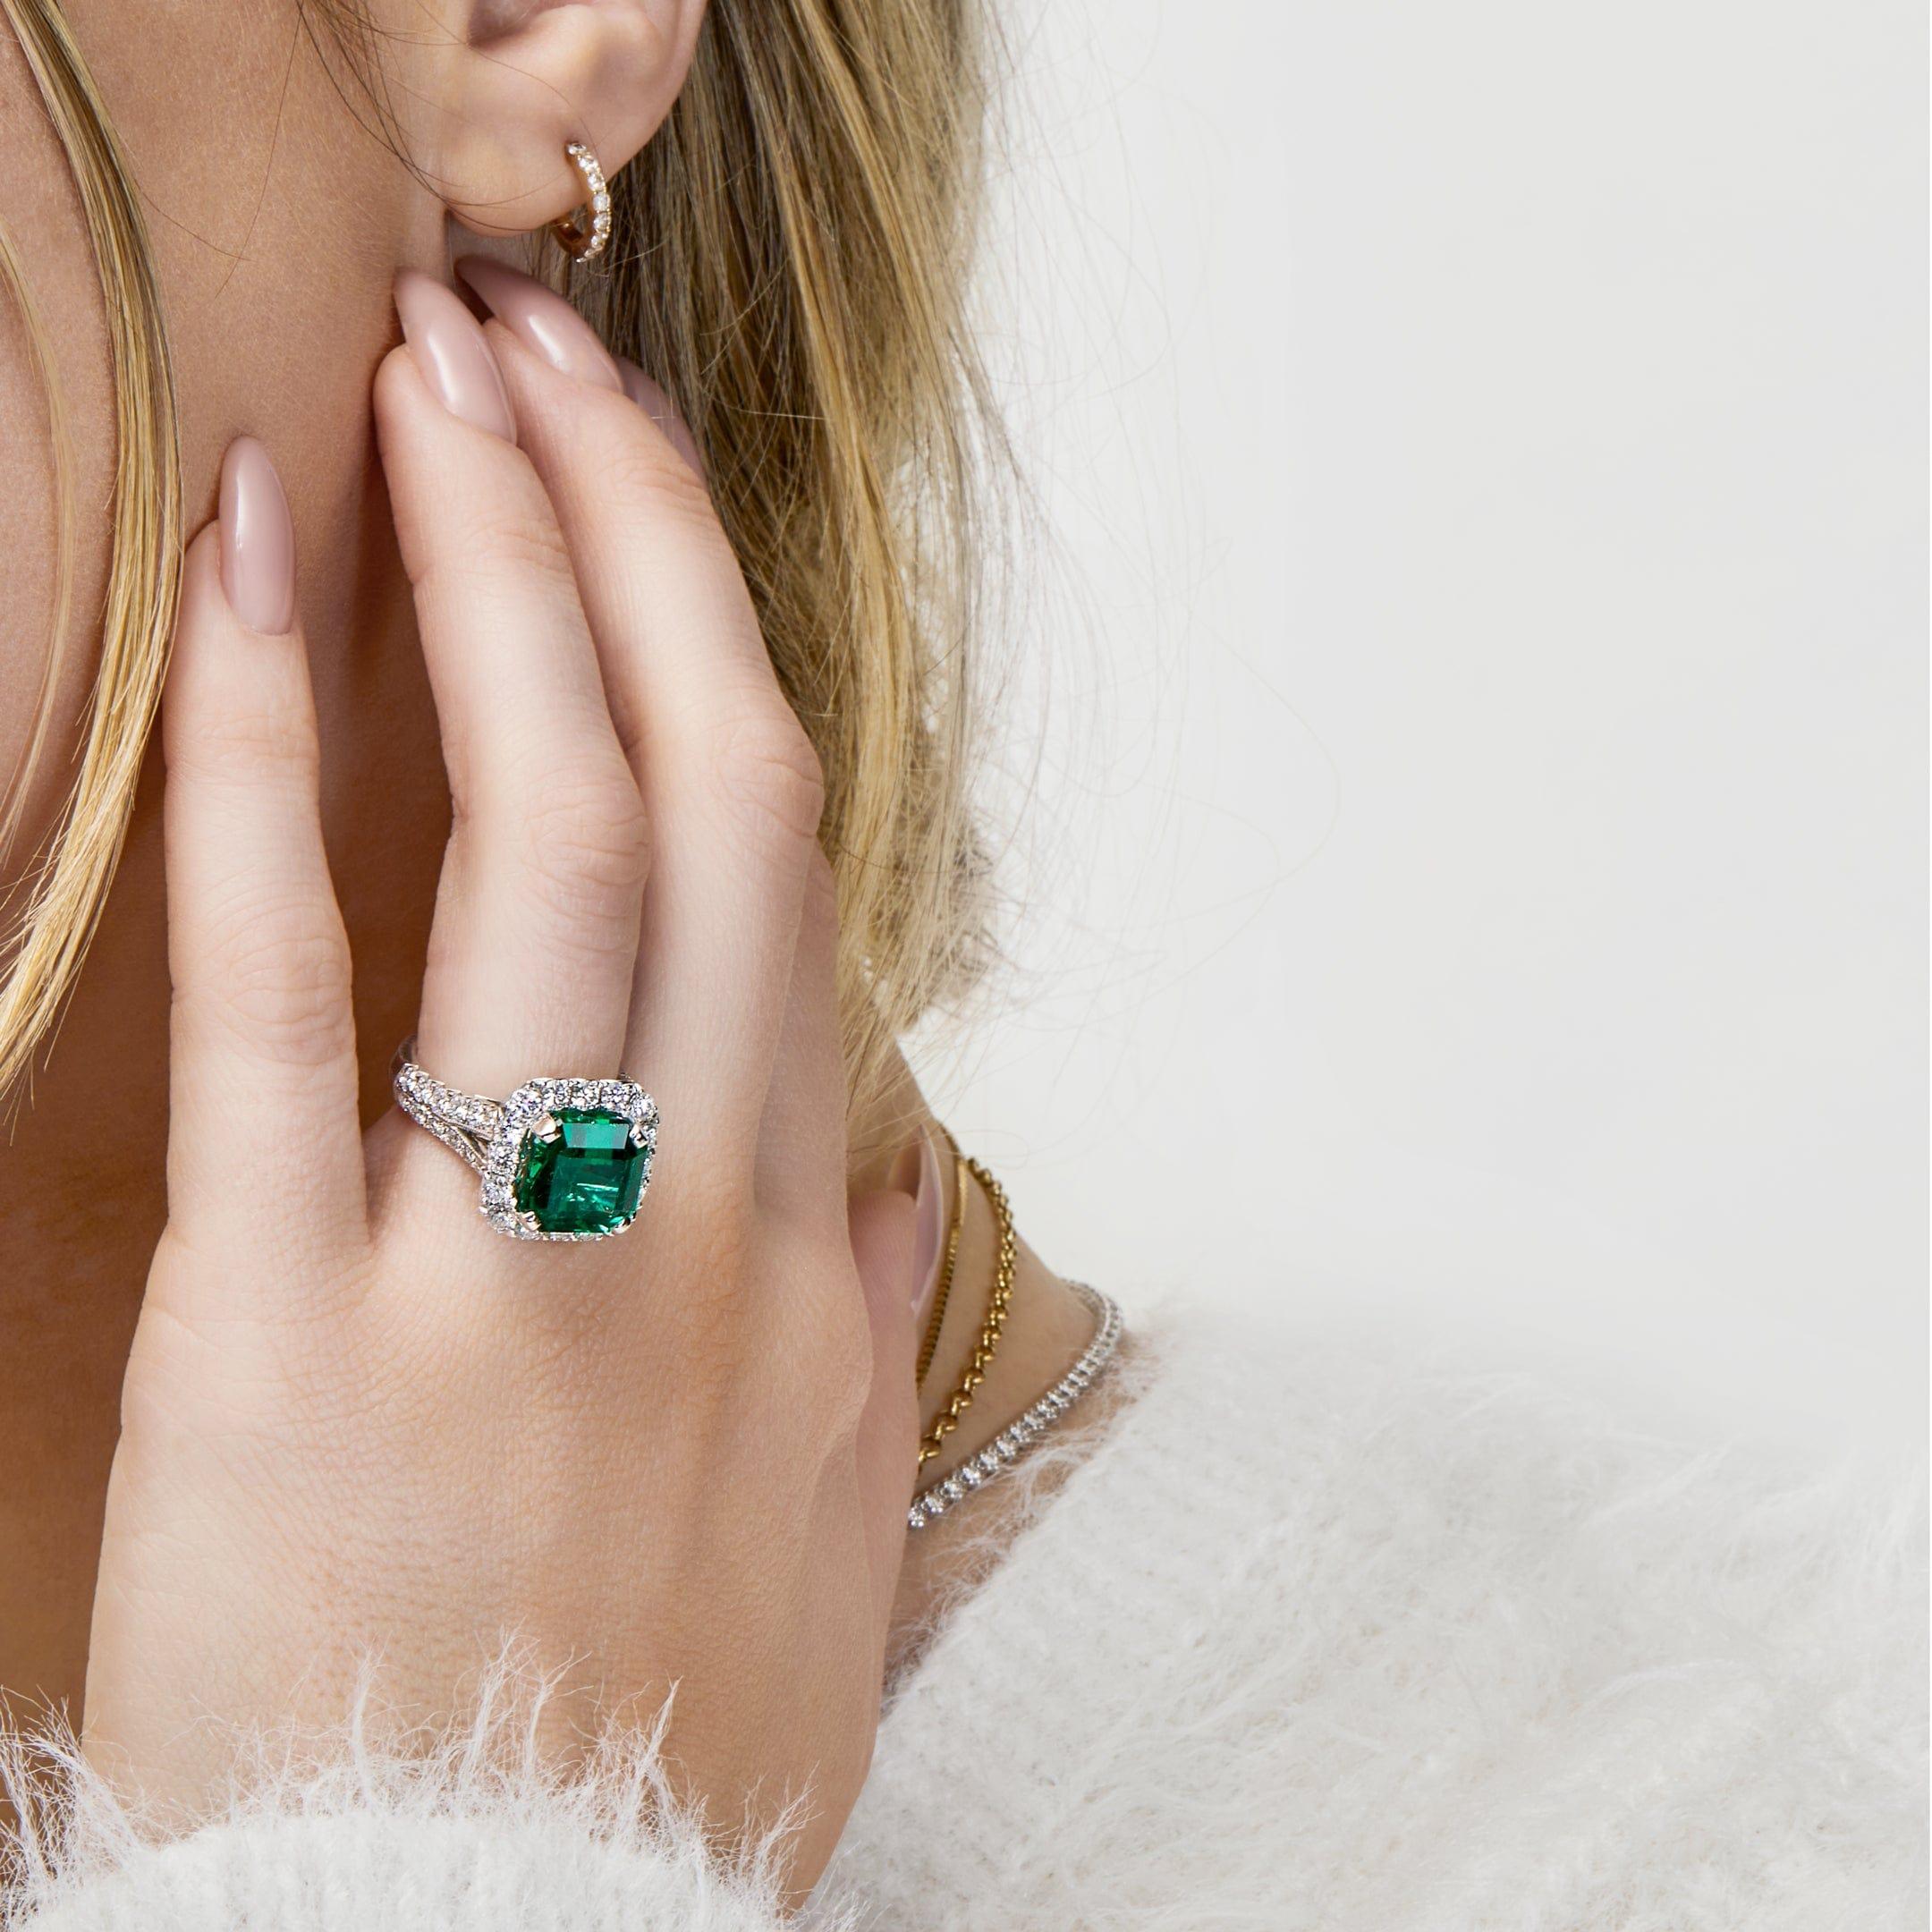 We invite you to take a closer look at this Zambian emerald ring featuring a 5.84ct vivid green emerald that has been cut into an octagonal step-cut adorned with 1.65ct diamonds. Set upon an 18-karat white gold band, contrasting with the emerald's